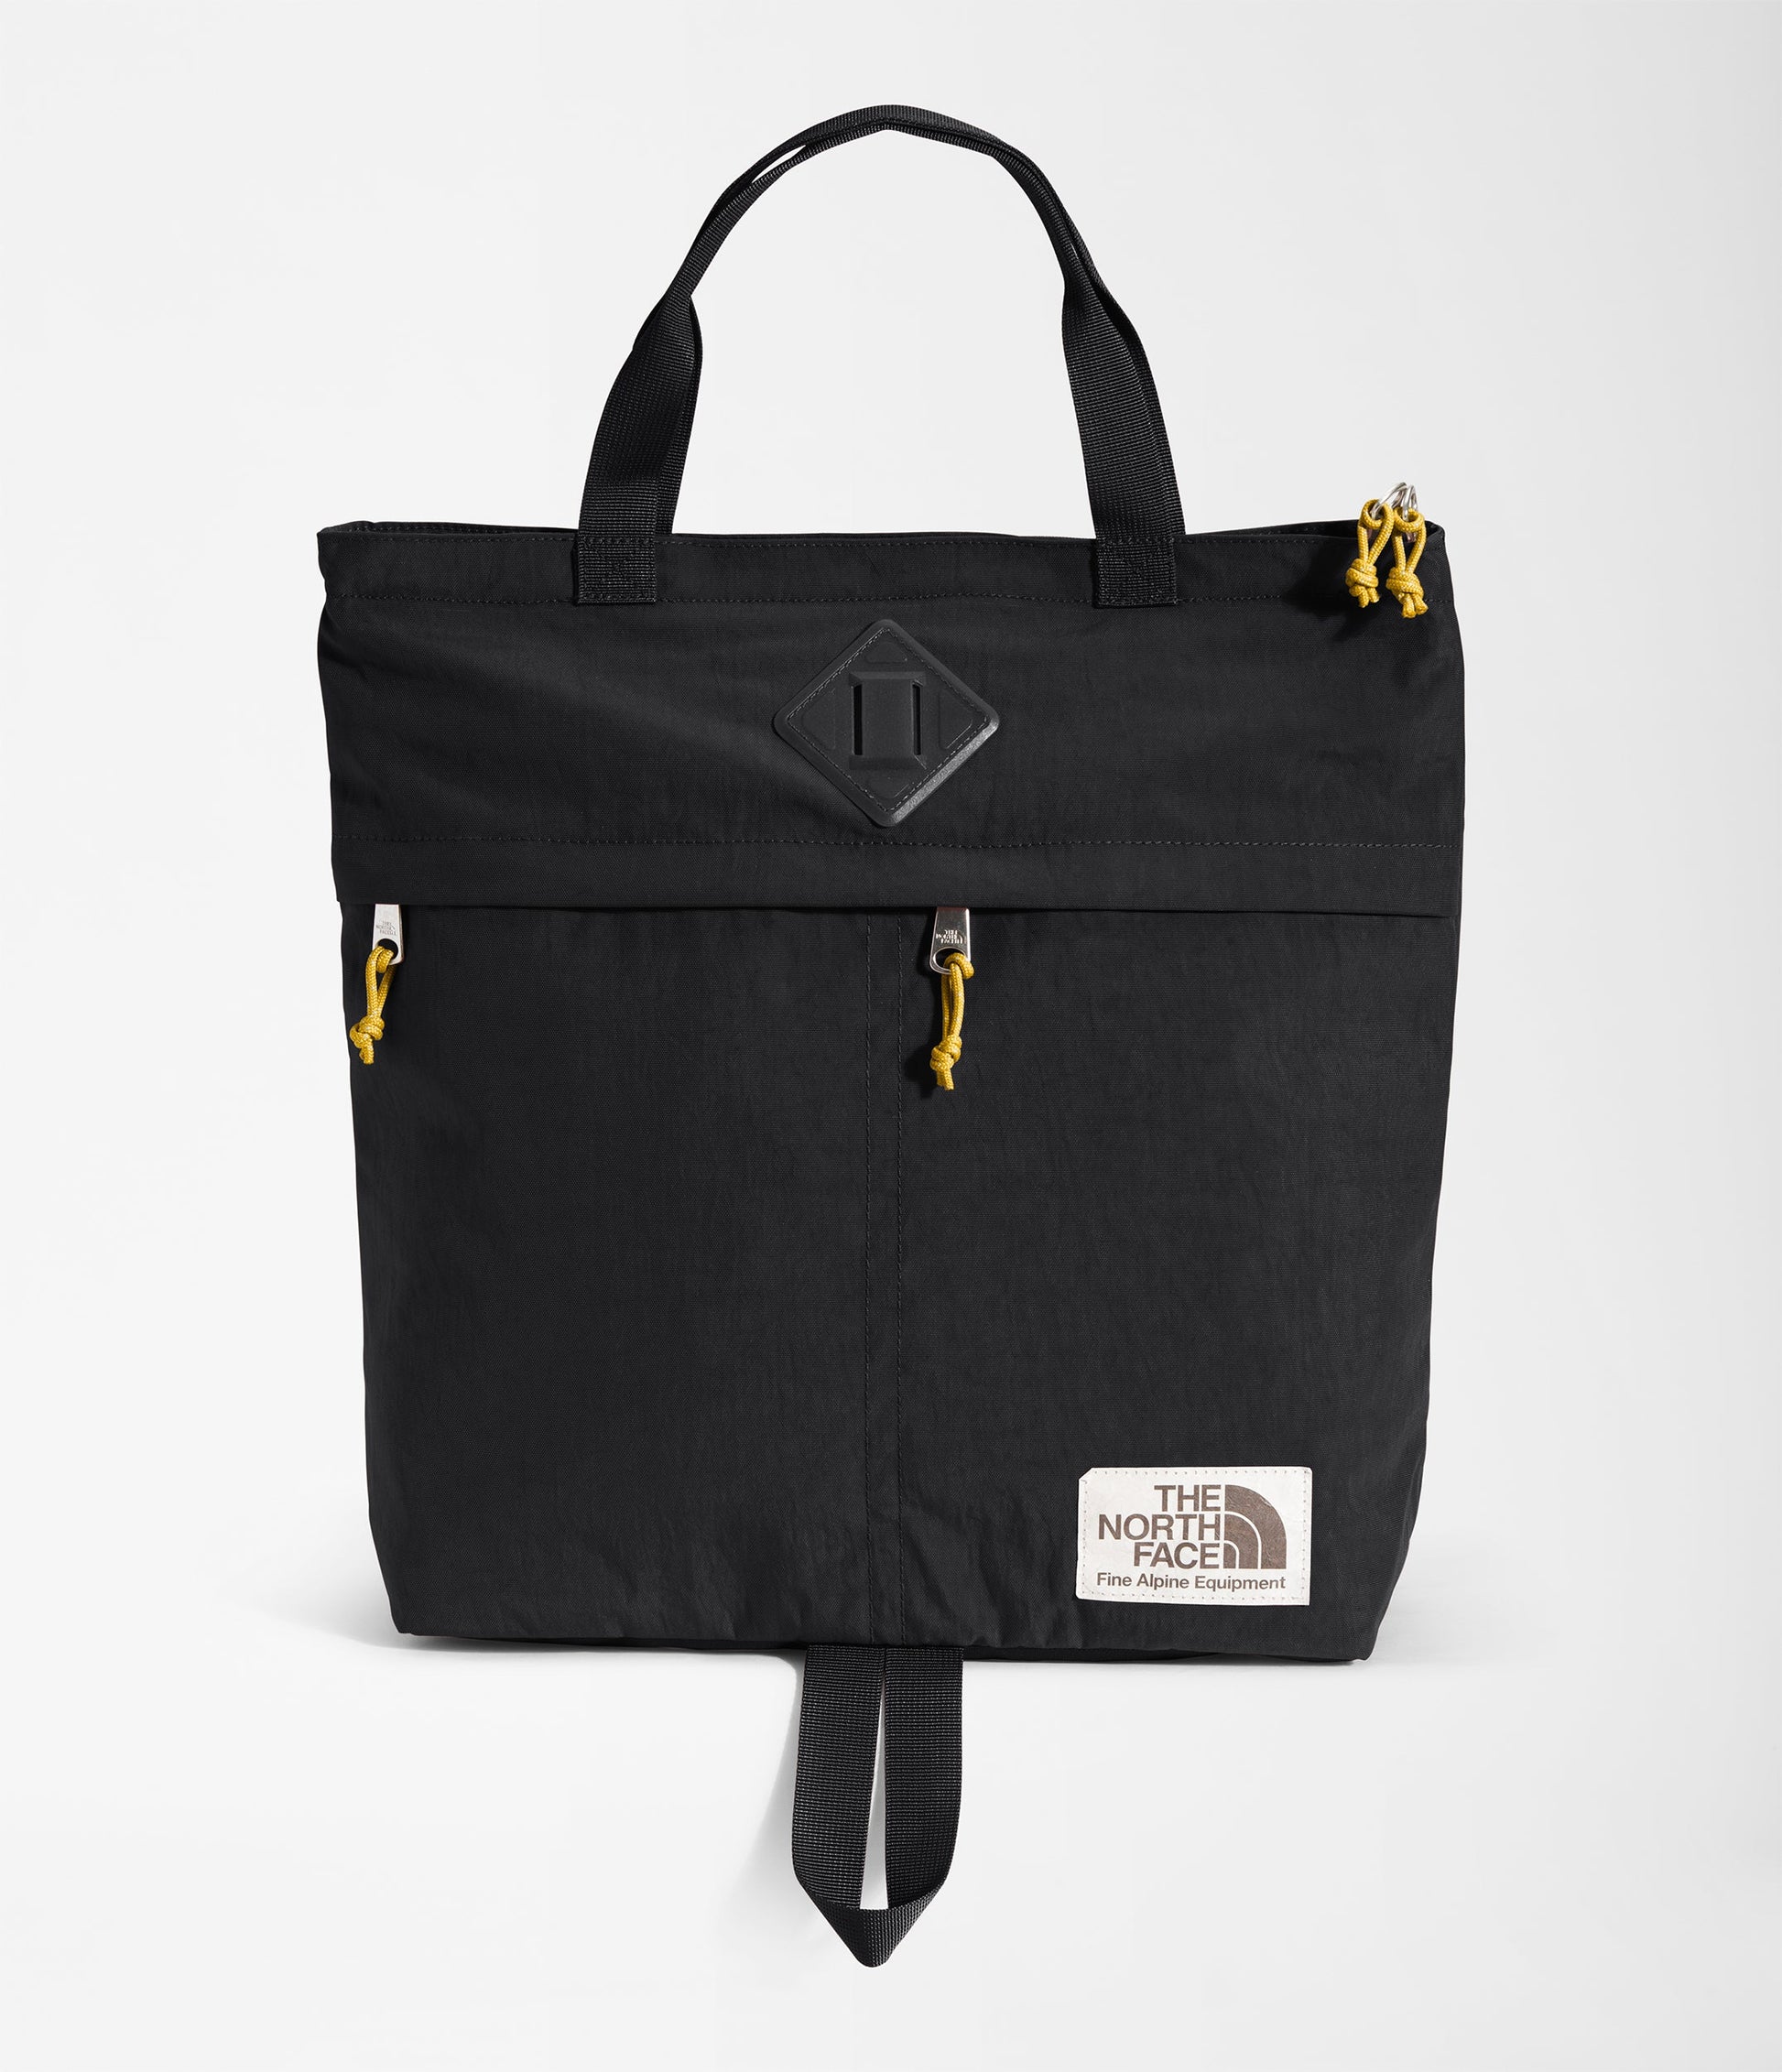 The North Face Berkeley Tote Pack - TNF Black/Mineral Gold